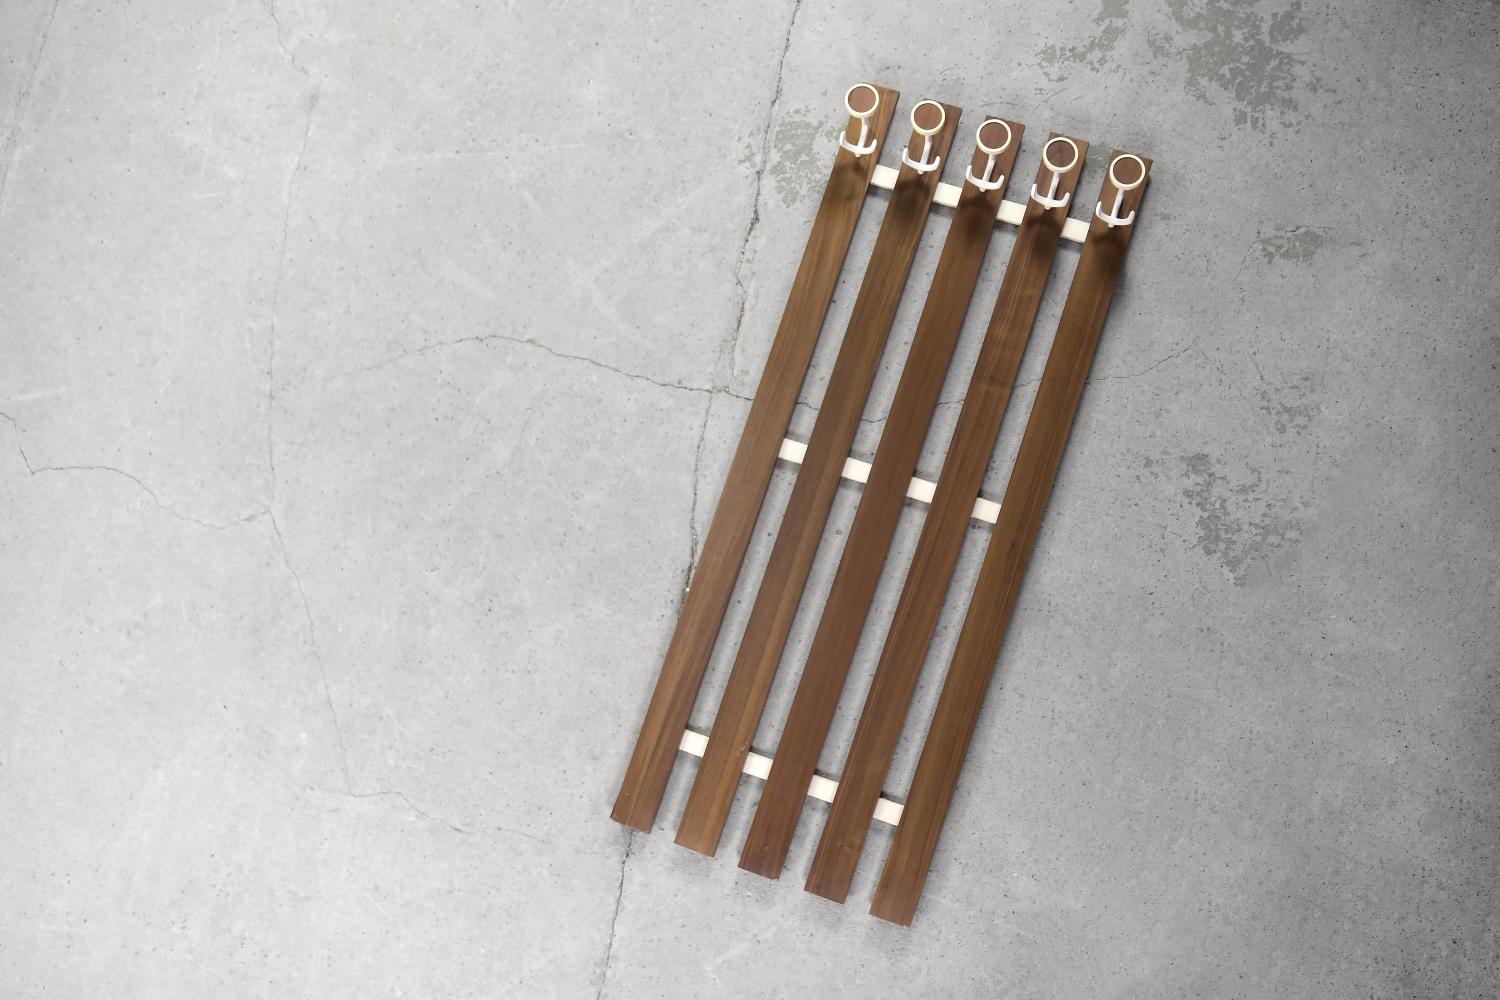 This modernist coat rack was made in Denmark during the 1950s. It was finished with teak wood in a warm shade of brown. It has five double clothes holders, which are made of metal in white colour and are finished with a geometric shape in plastic.